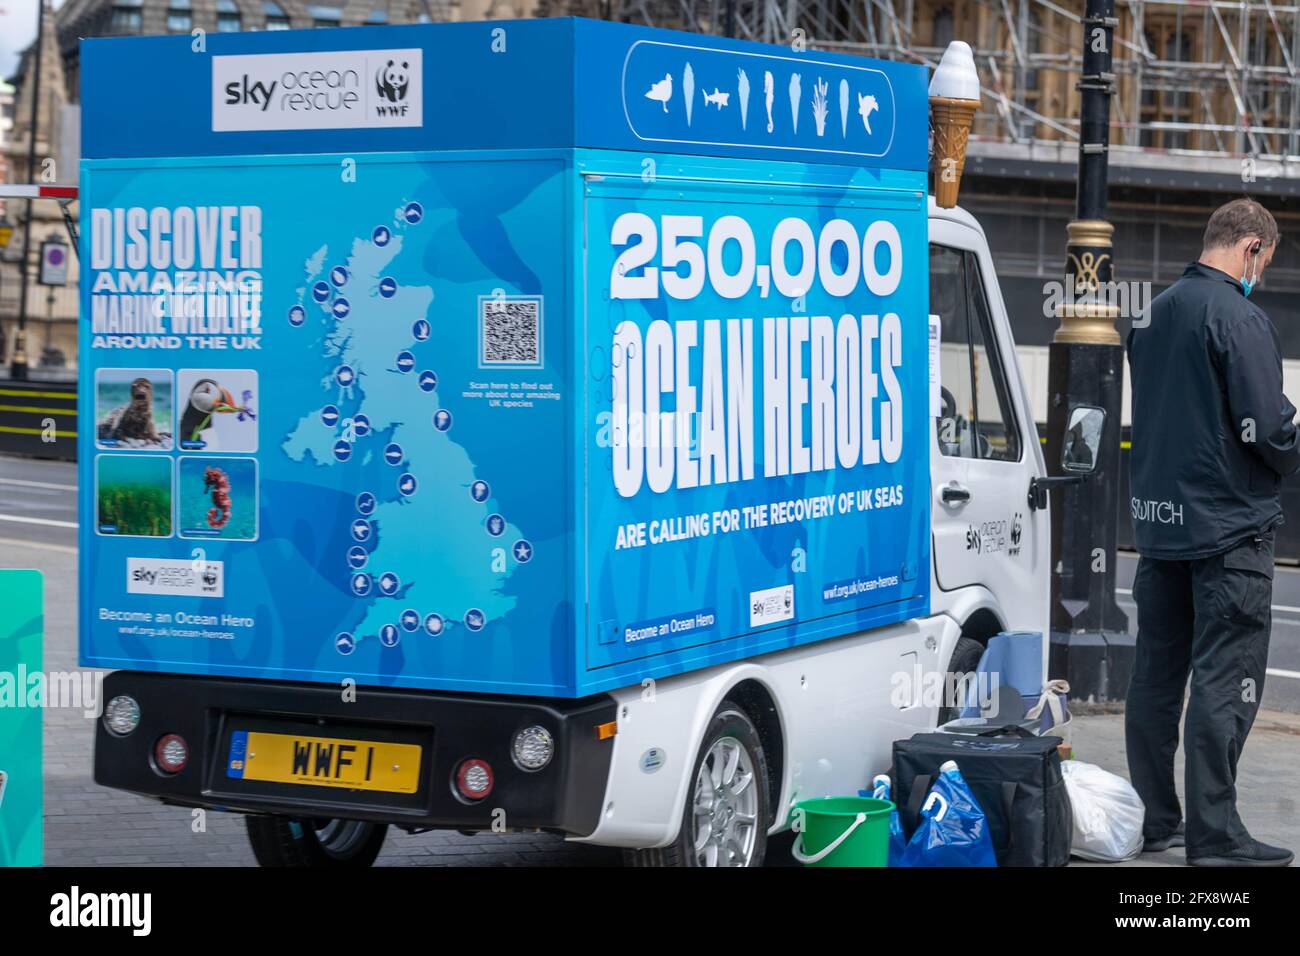 London, UK. 26th May, 2021. A World Wildlife fund and Sky and Sky Zero Ocean Hero event outside the Houses of Parliament to restore and recover our oceans Credit: Ian Davidson/Alamy Live News Stock Photo